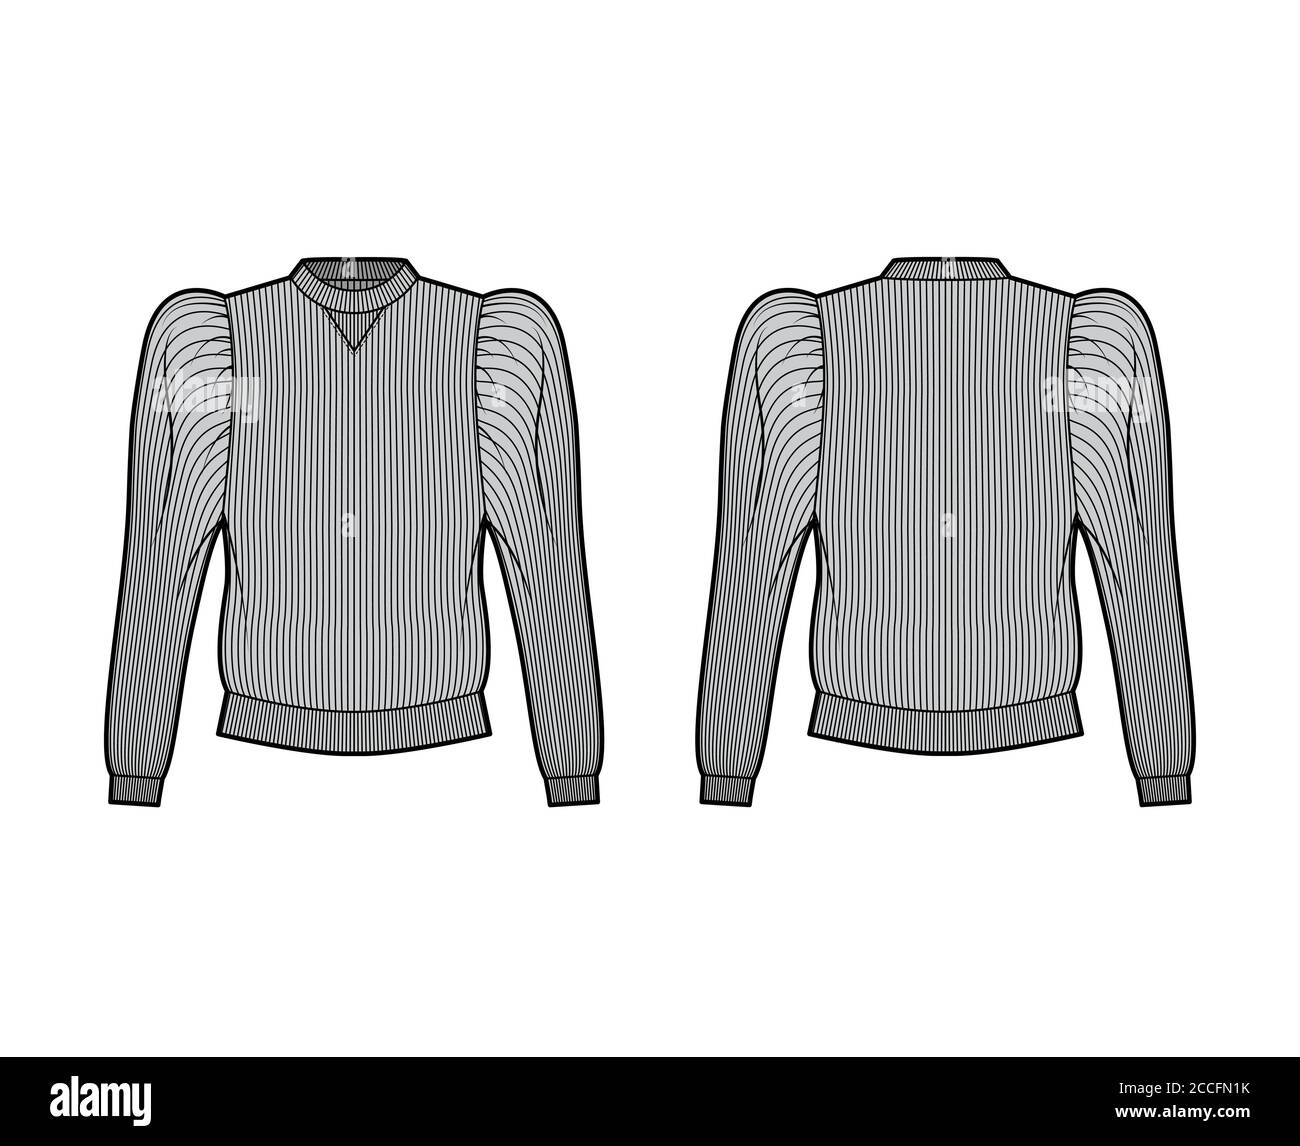 Ribbed cotton-jersey sweatshirt technical fashion illustration with gathered, puffy long sleeves, relaxed fit. Flat jumper apparel template front, back grey color. Women men unisex top knit CAD mockup Stock Vector